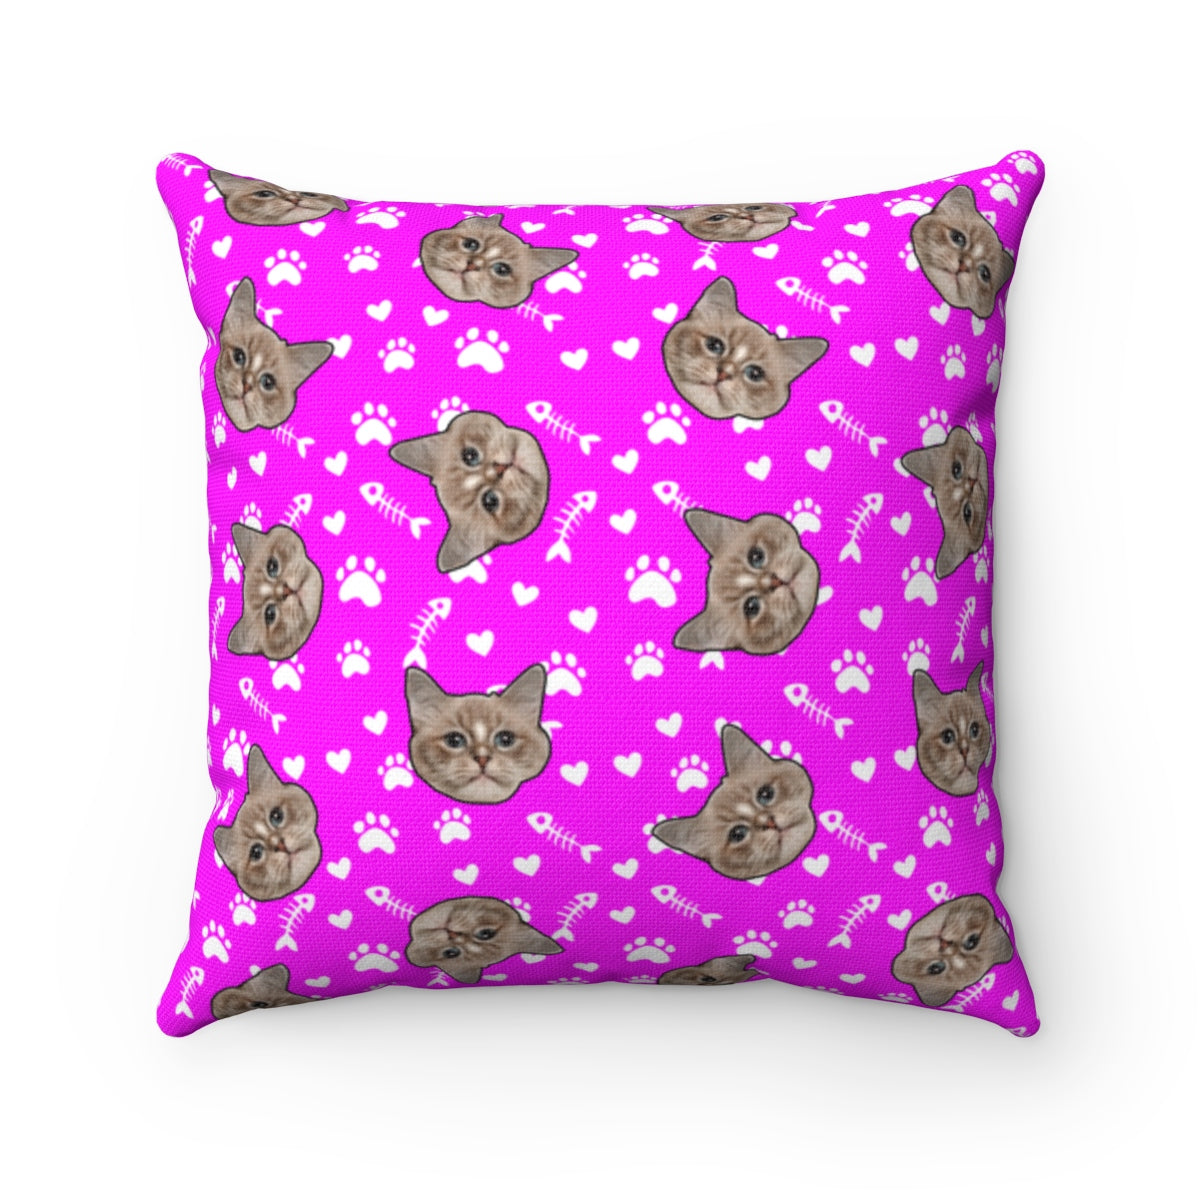 Custom Pillow With Your Cats Face Printed On It - Paws & Fish Bones